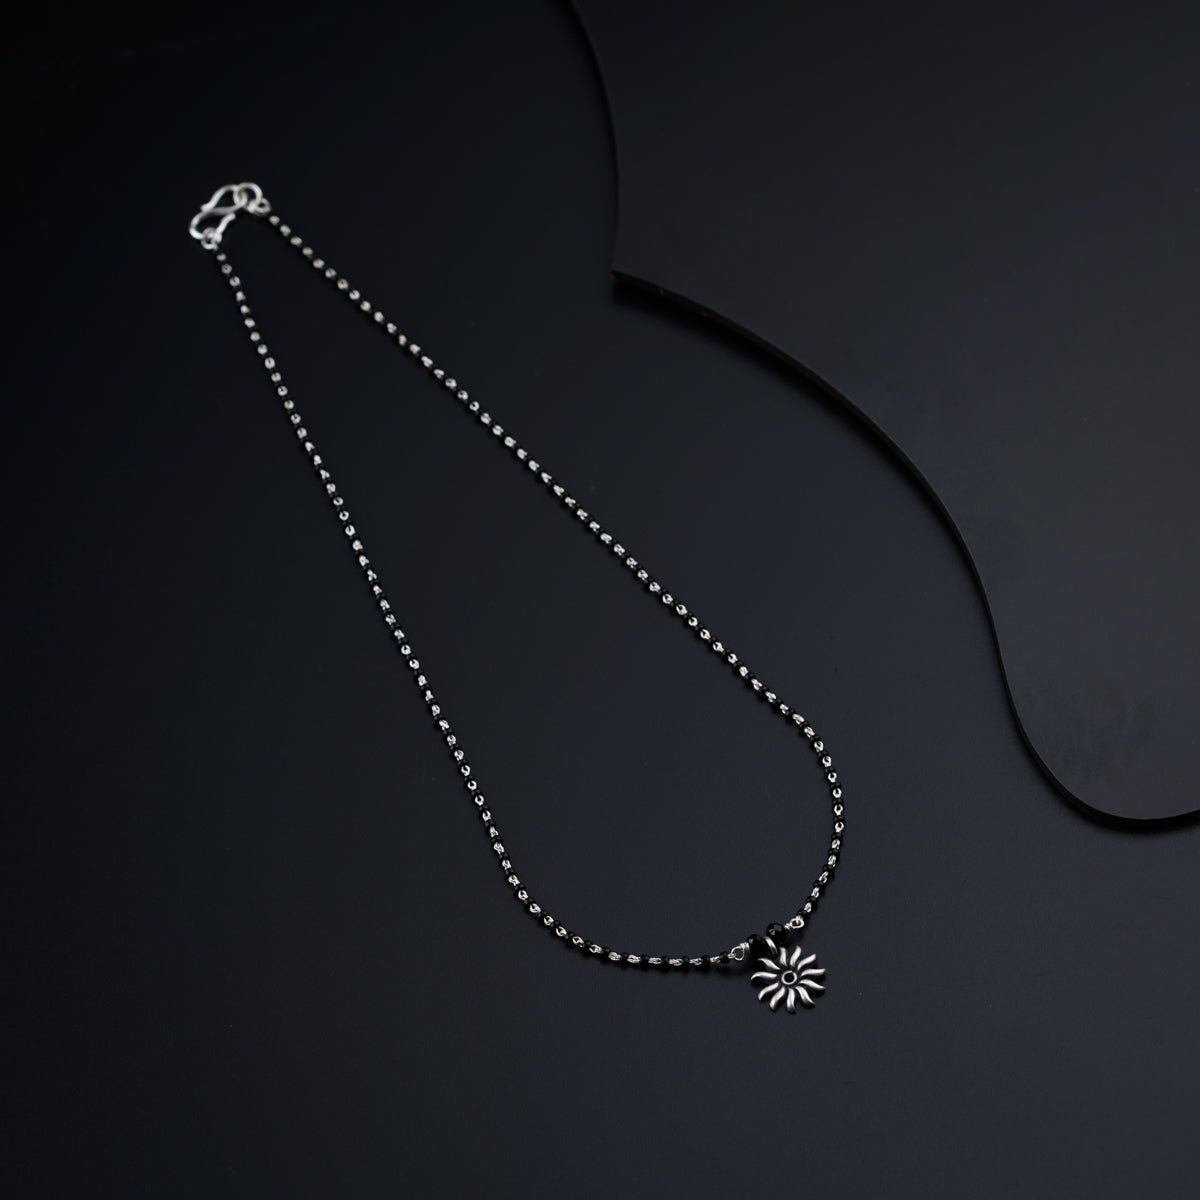 a black and white photo of a necklace on a black background